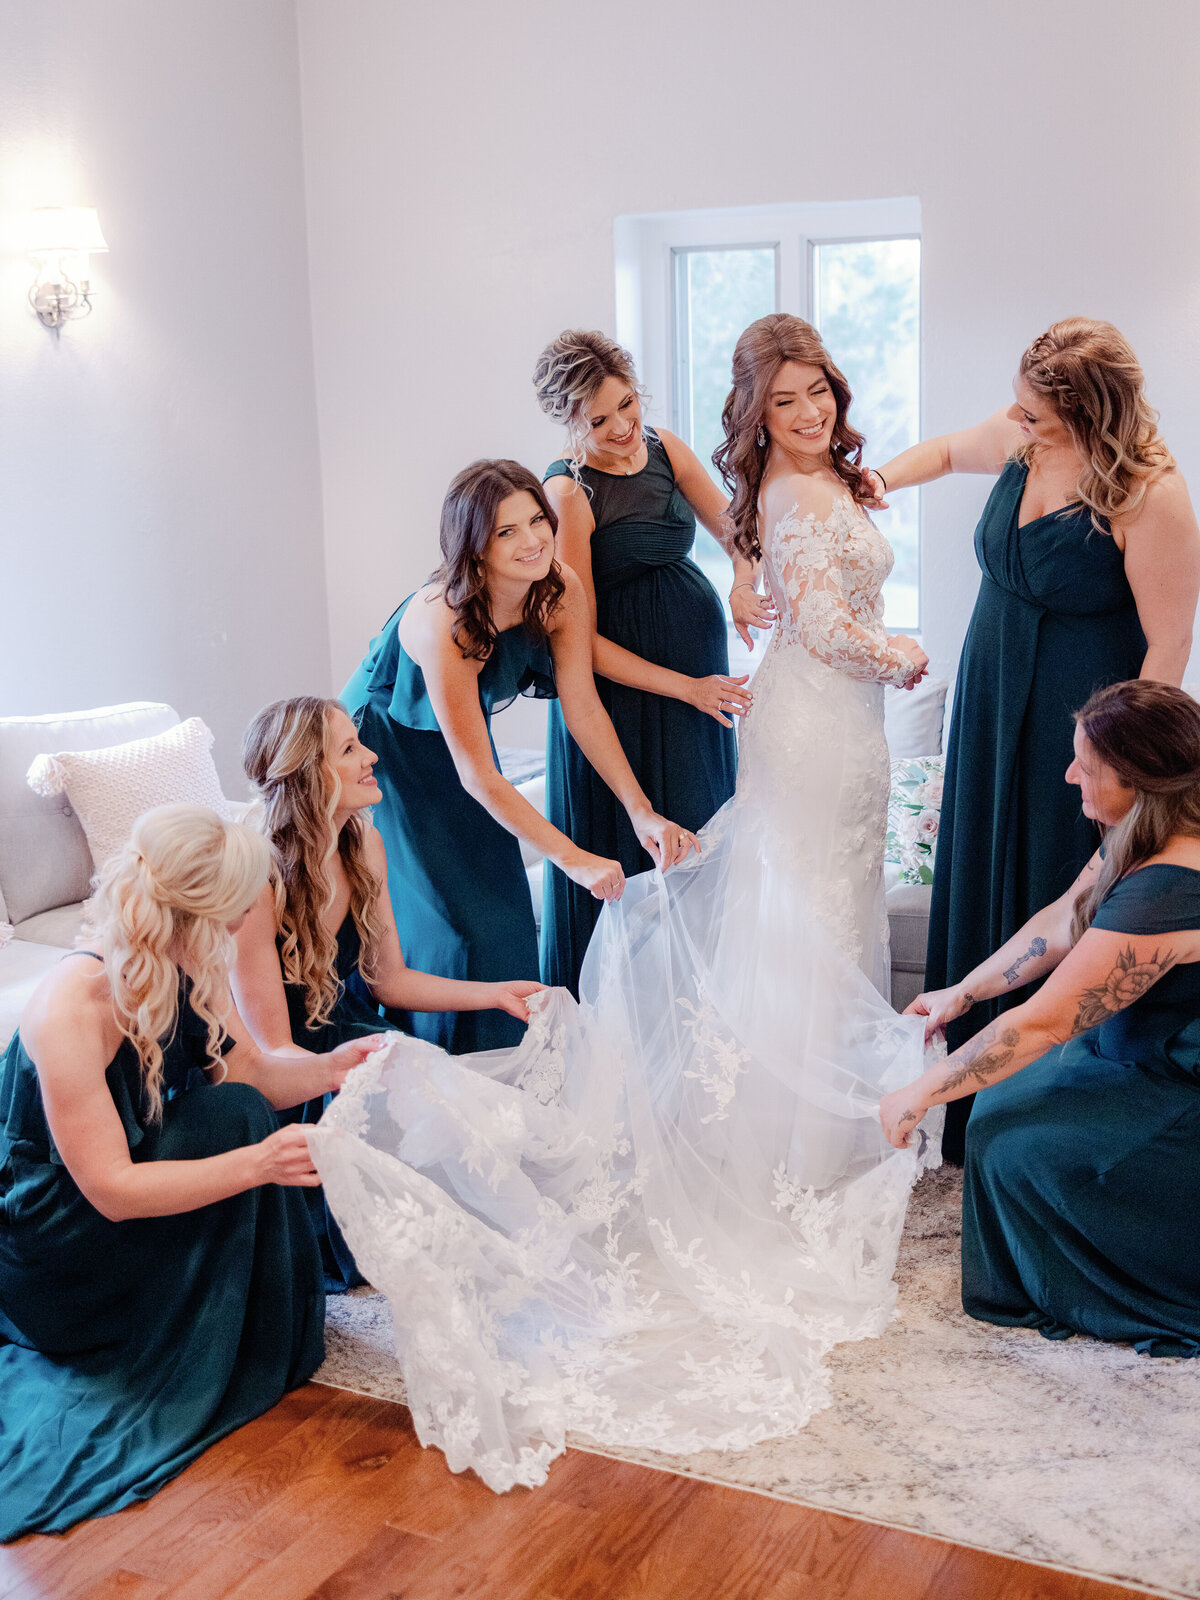 Bridesmaids dressed in dark teal dresses help the bride with her finishing touches before they all head to the wedding ceremony